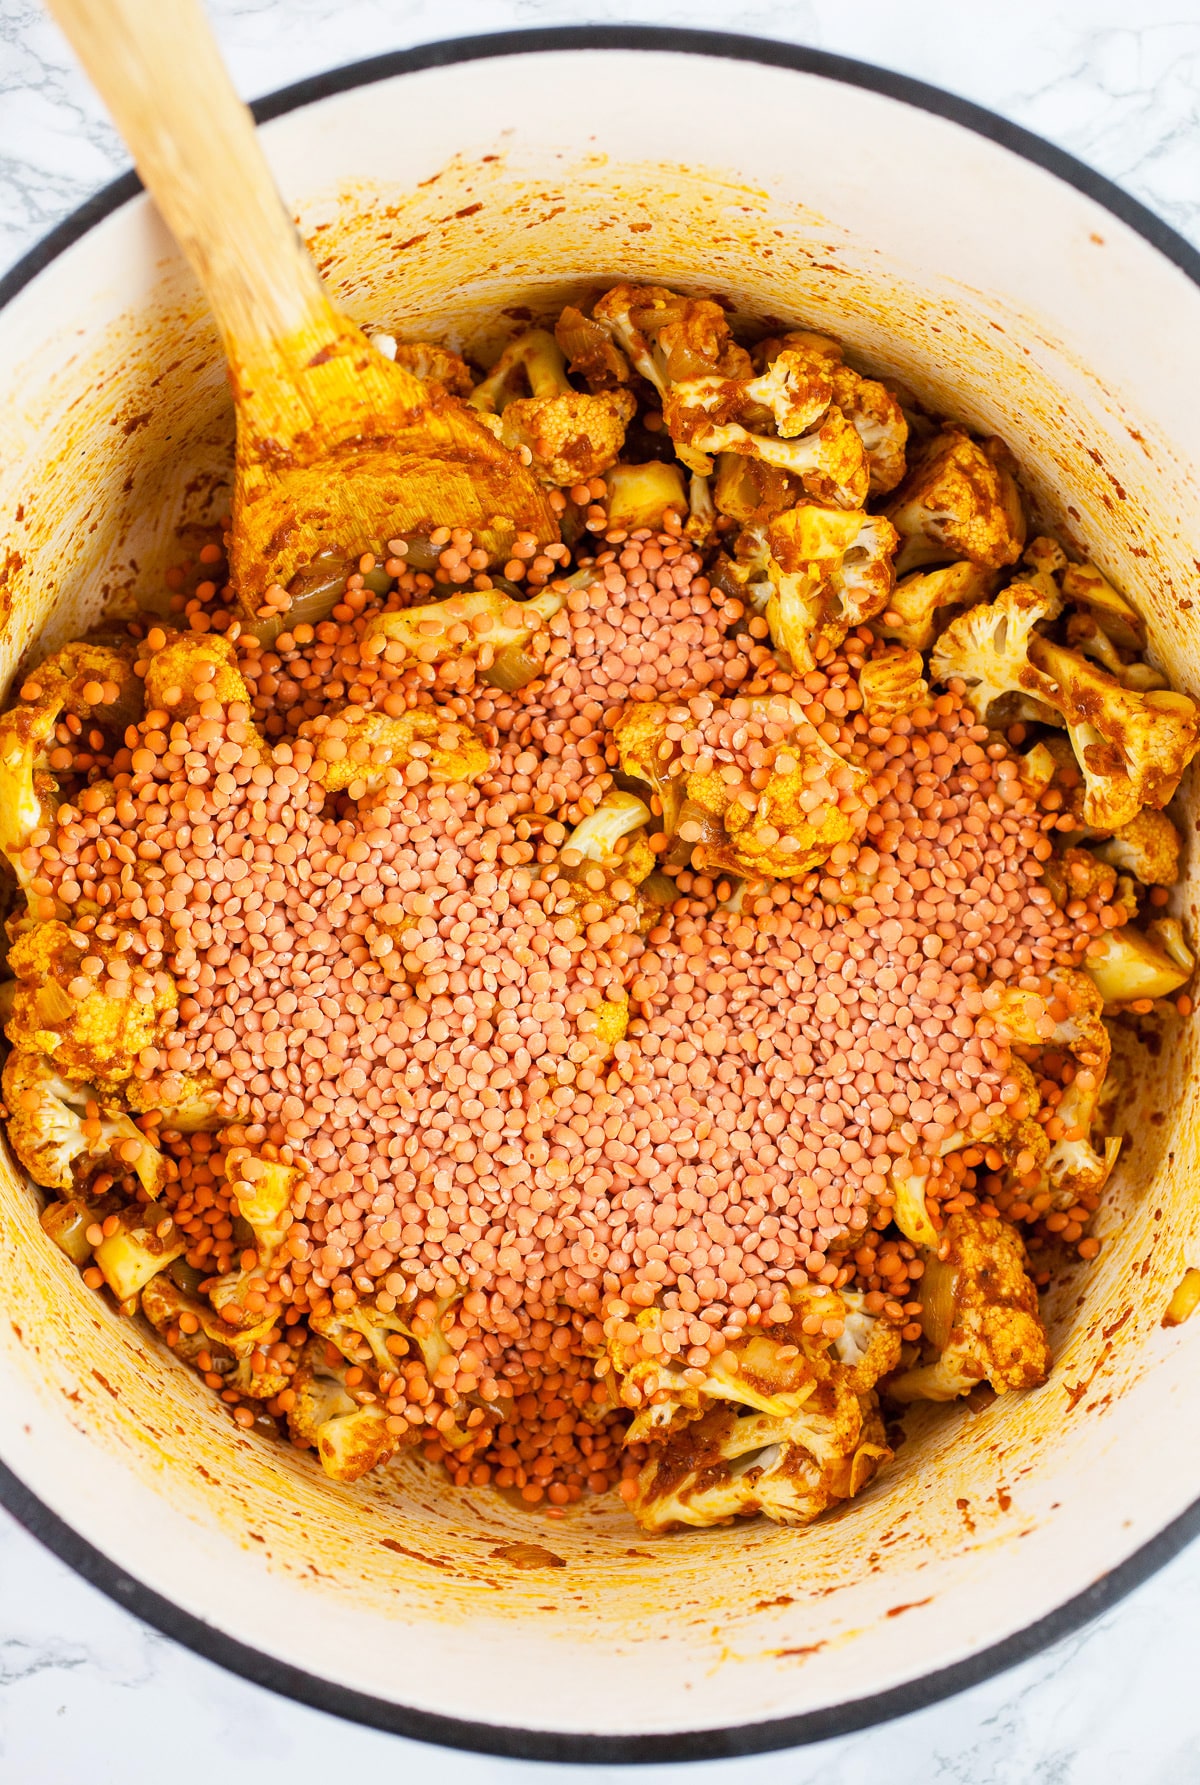 Red lentils and cauliflower with spices in Dutch oven with wooden spoon.